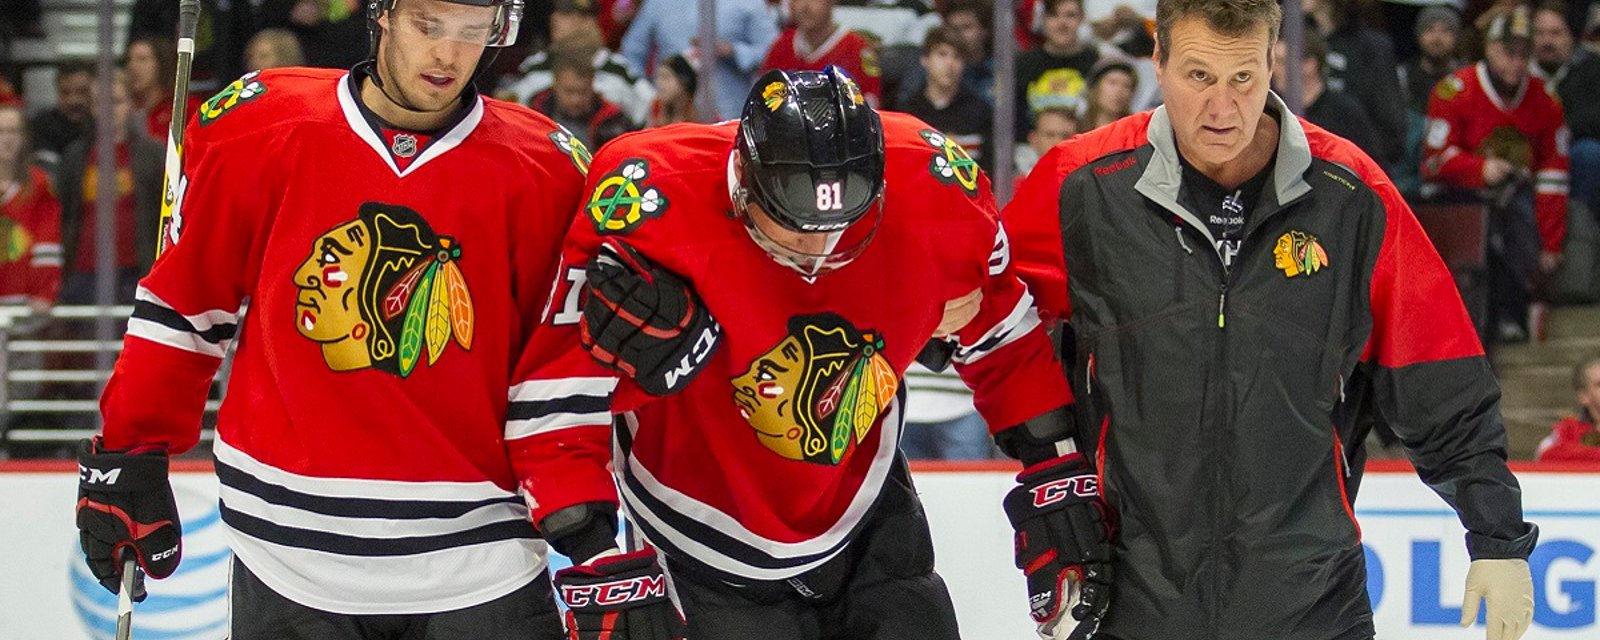 Report: Marian Hossa taken to hospital following exhibition game.